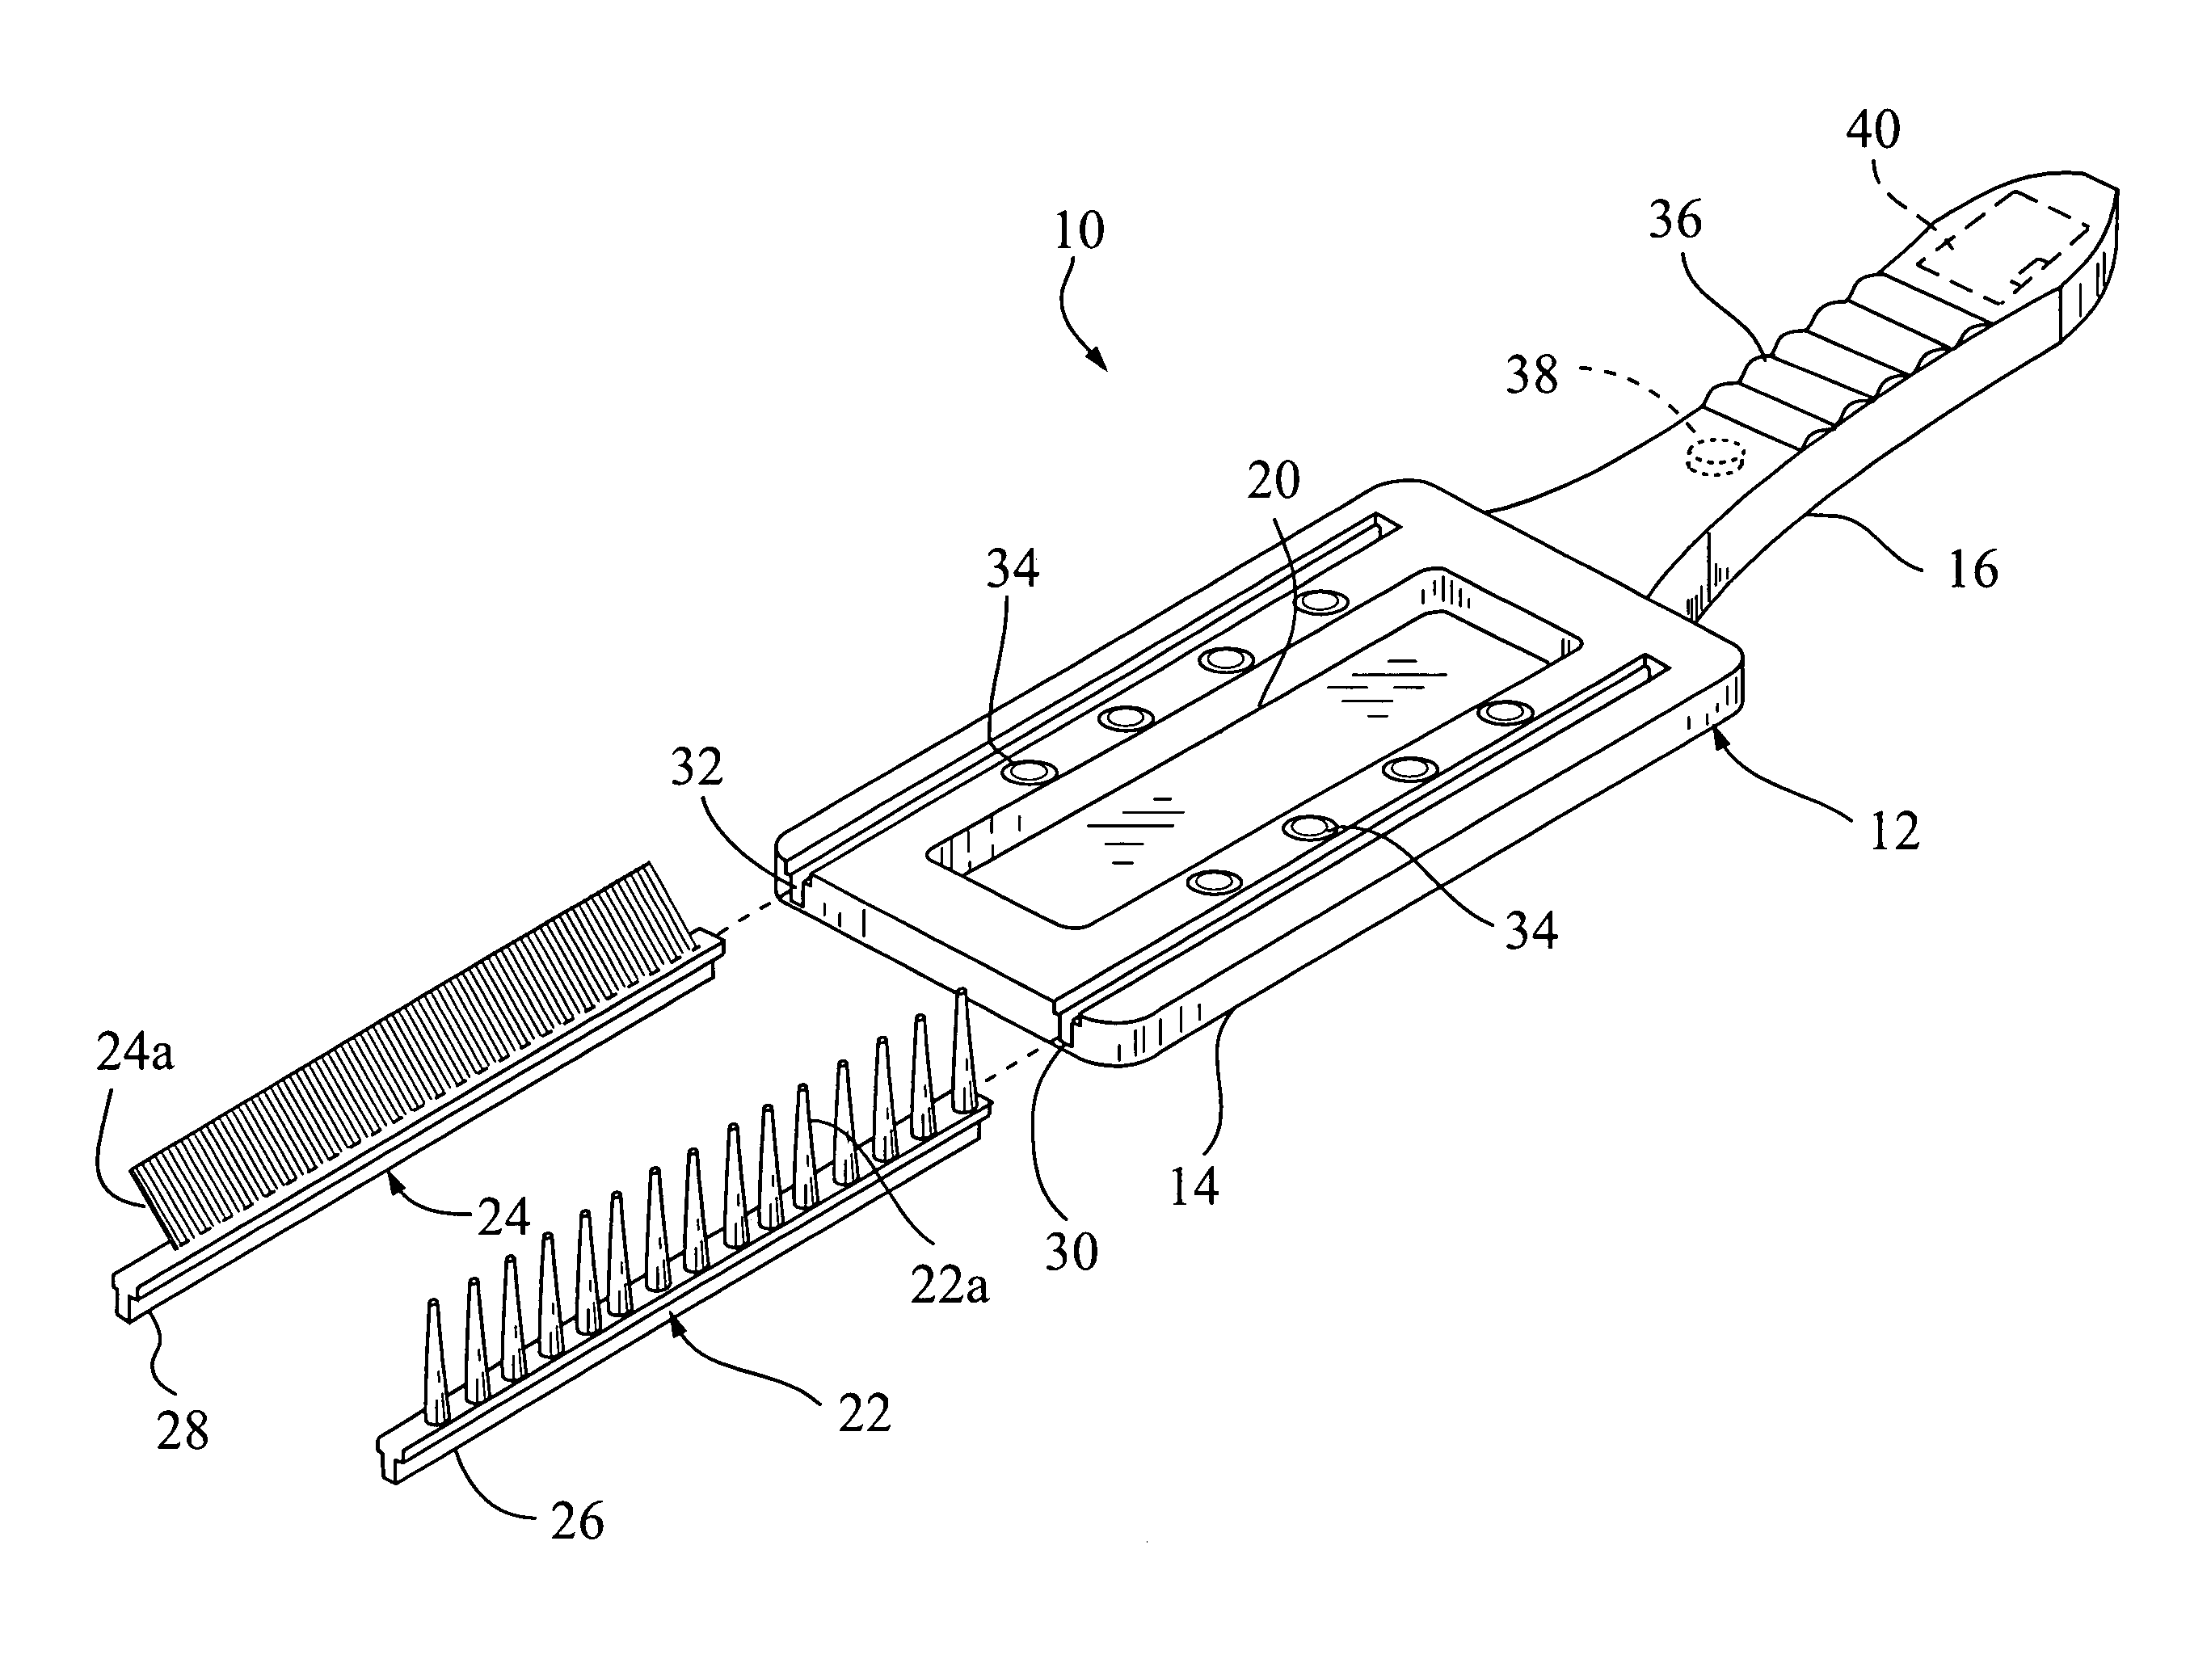 Insect locator and removal tool